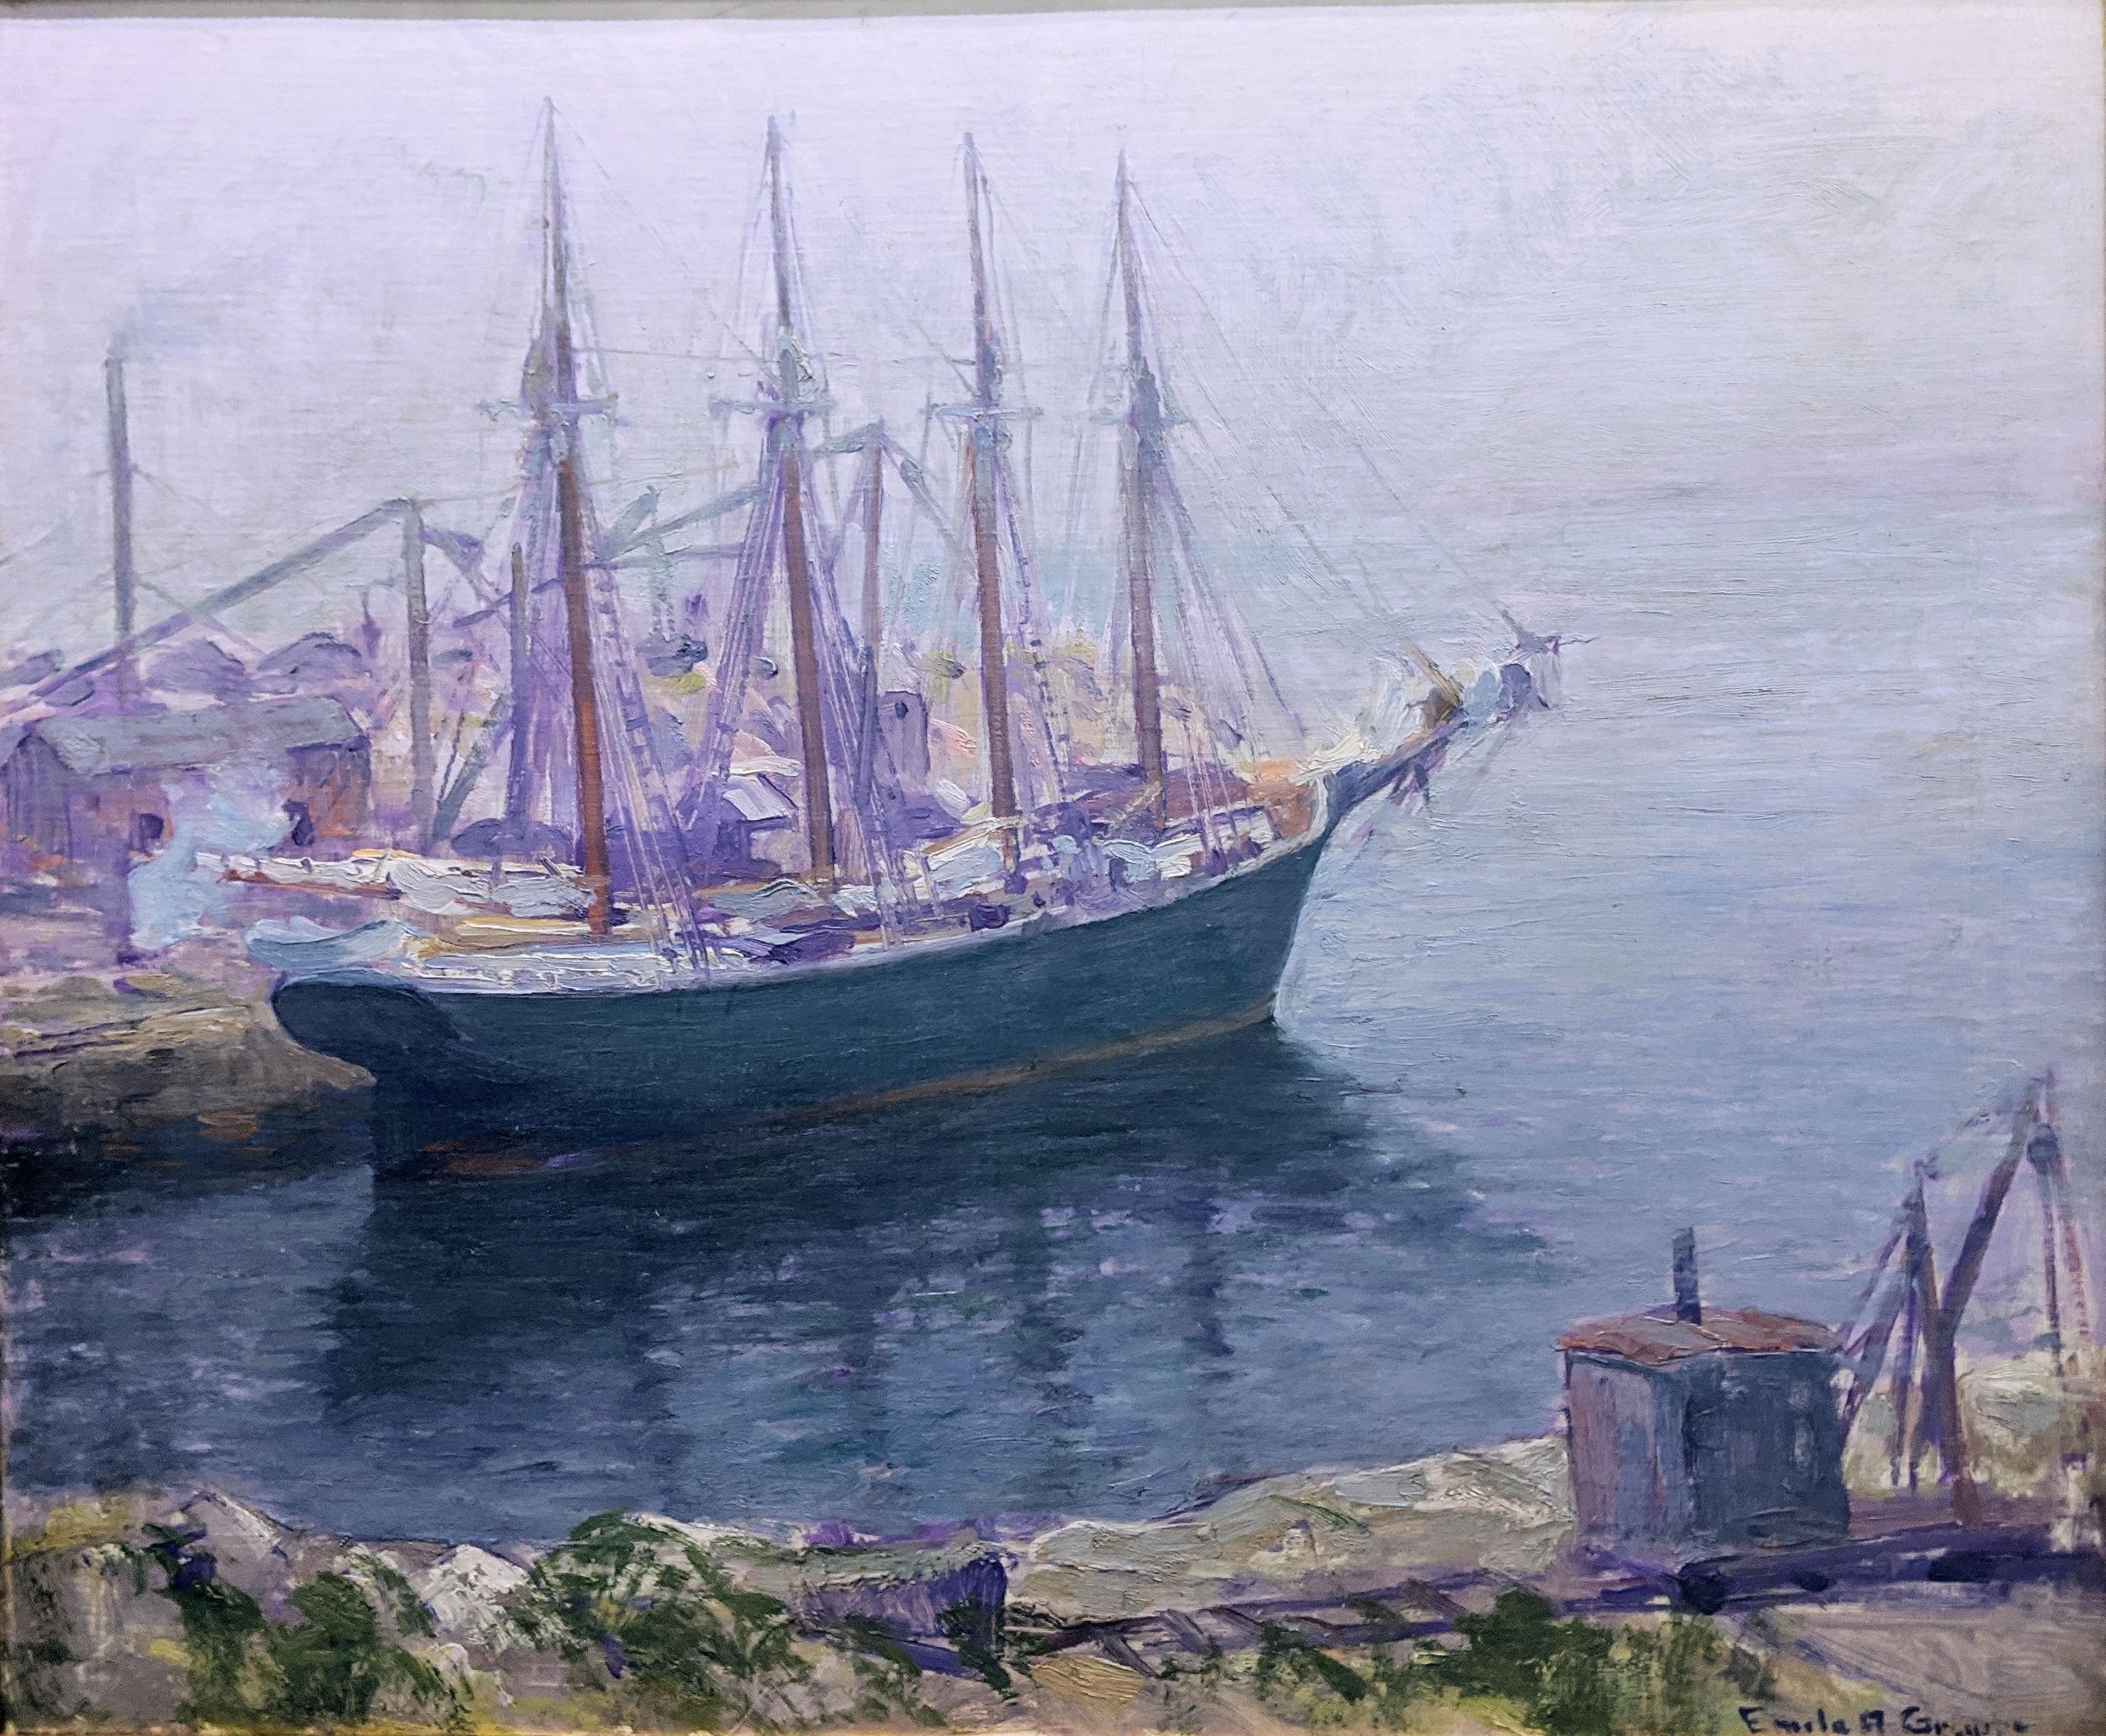 "View of Boats in Gloucester Harbor," Emile Gruppe, American Impressionism